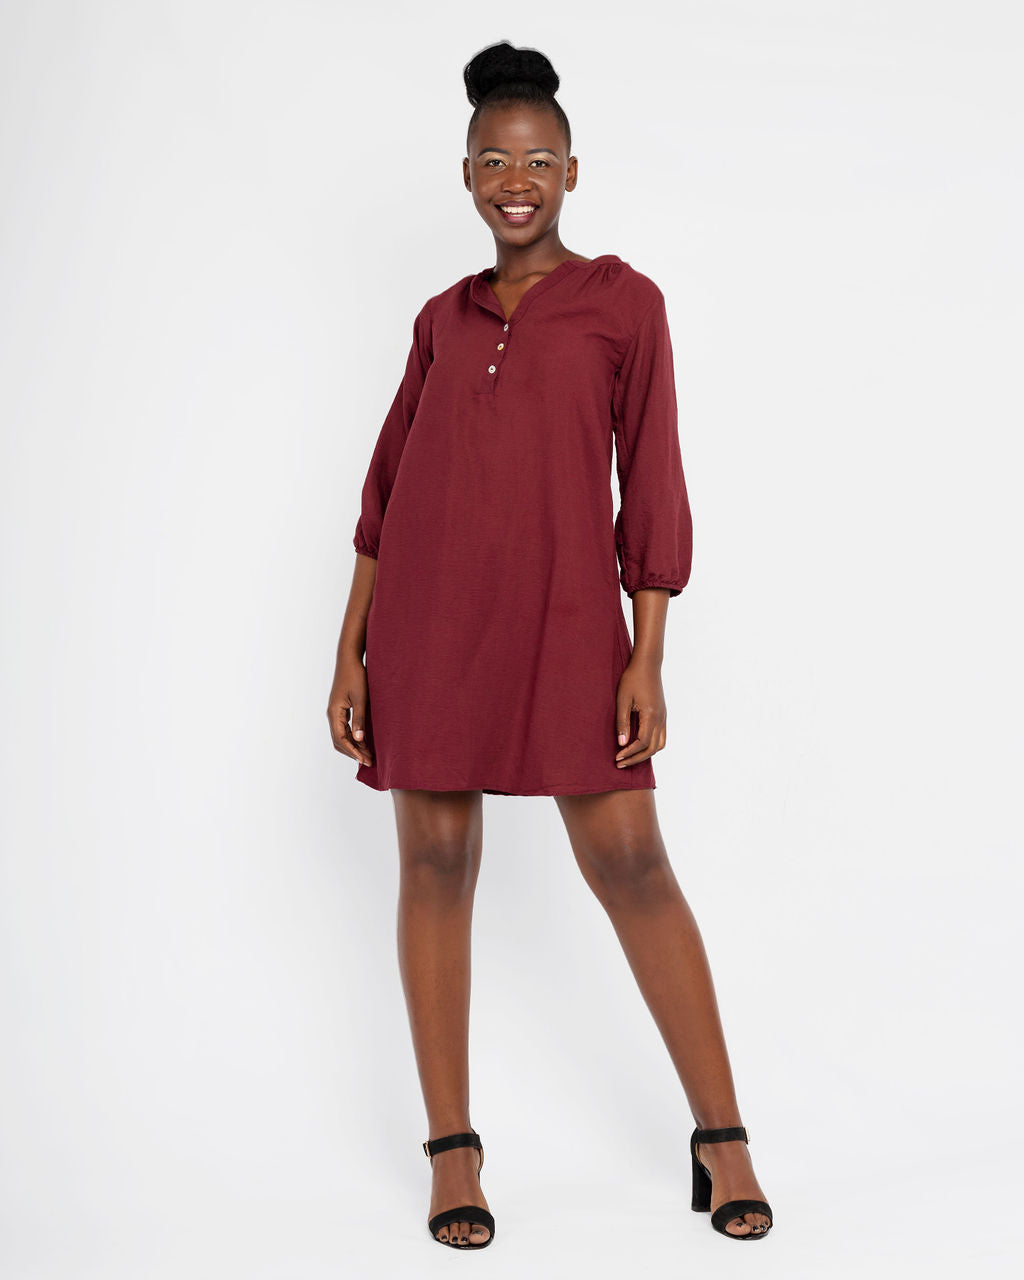 BURGUNDY CHINESE COLLOR DRESS